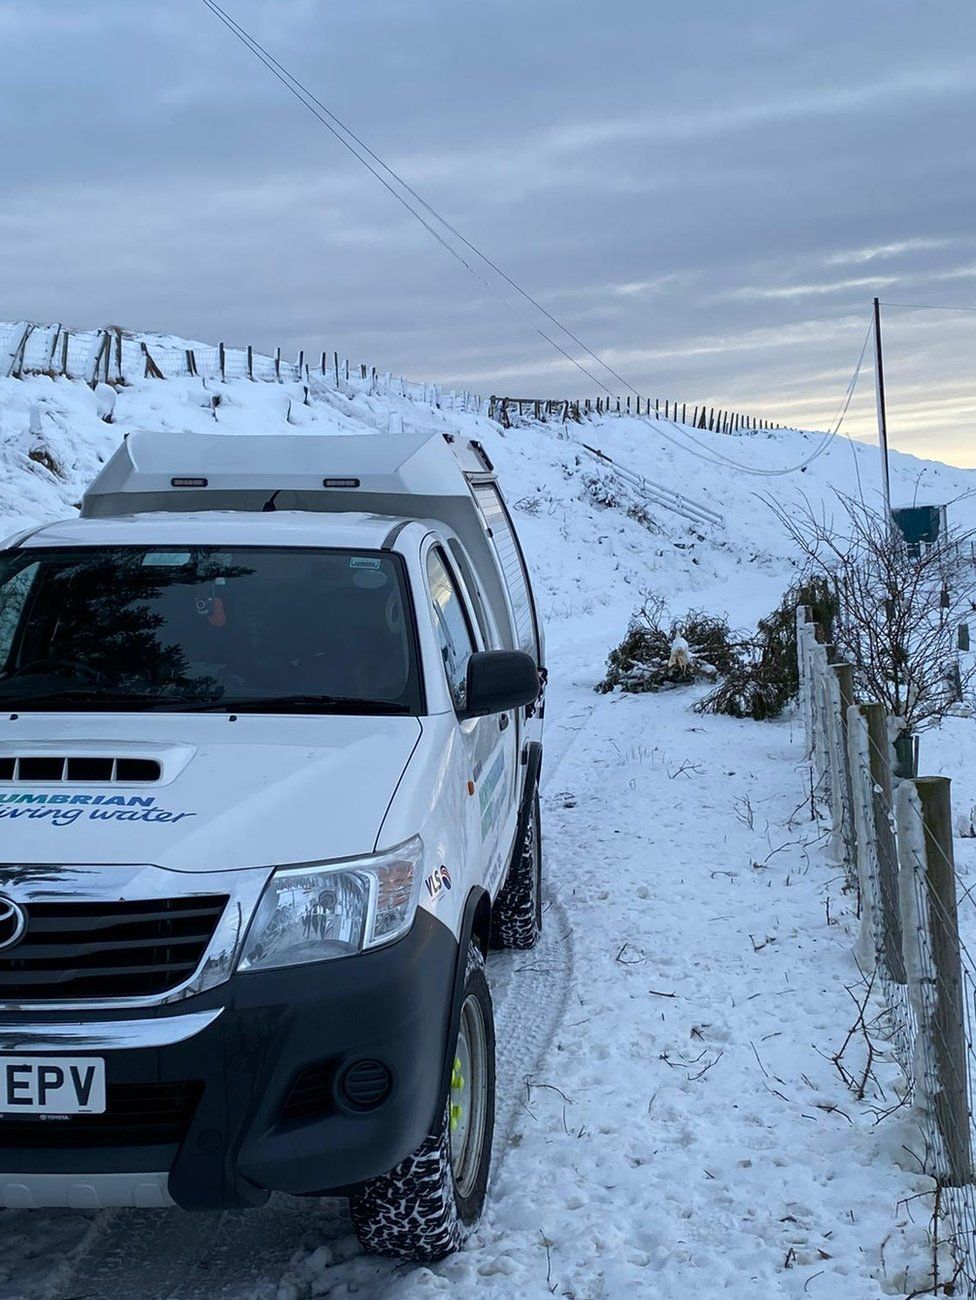 A Northumbrian Water van parked in the snow near a fallen tree